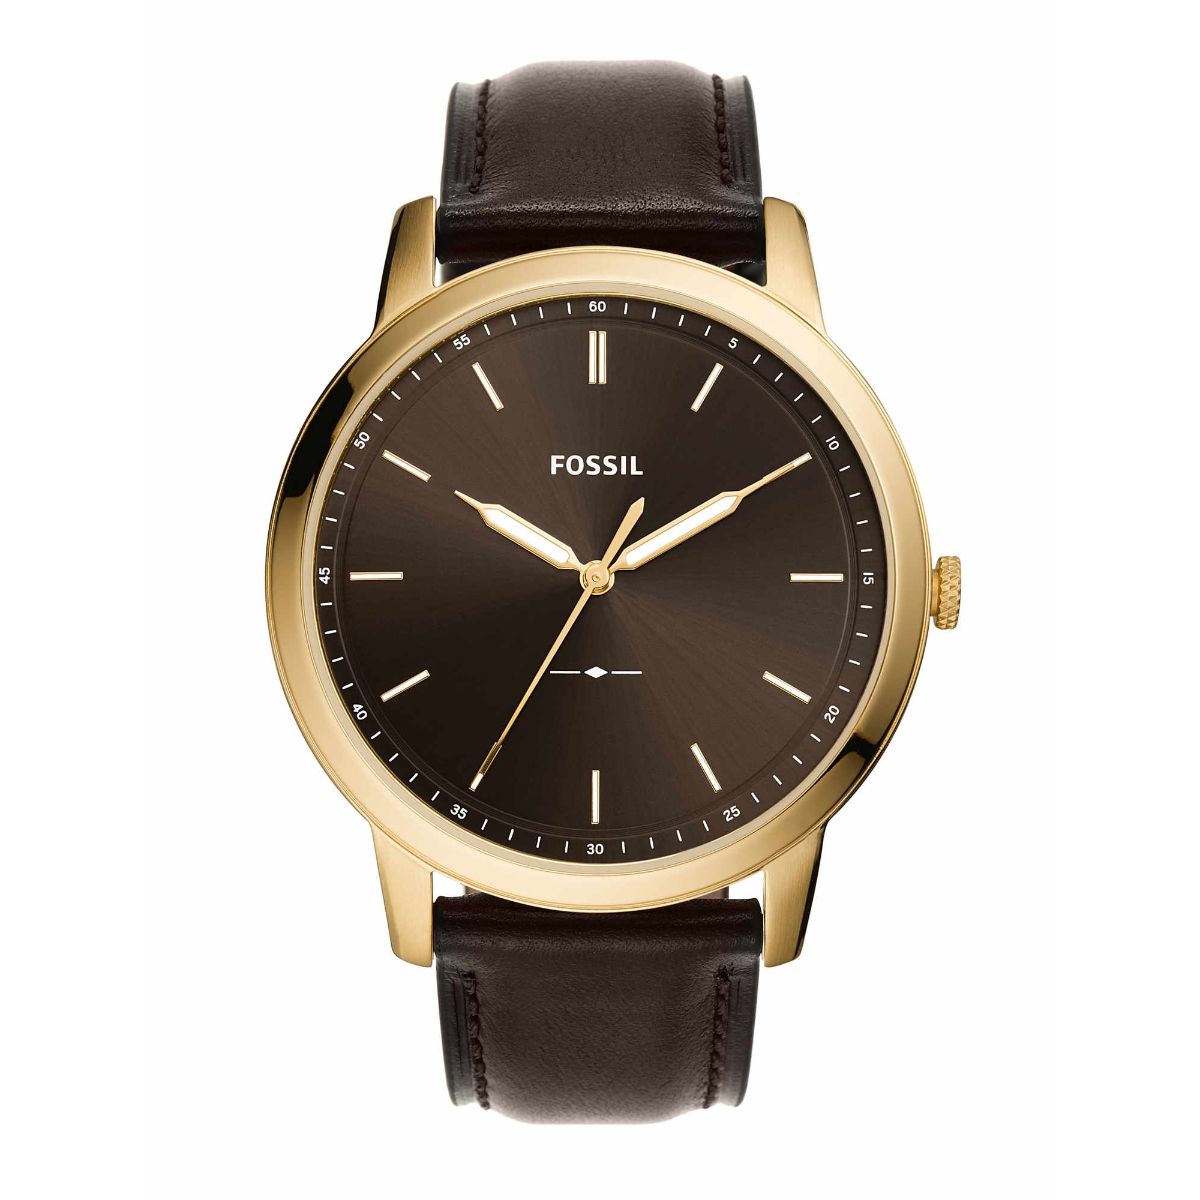 Fossil The Minimalist 3H Brown Watch FS5756 For Men: Buy Fossil The ...